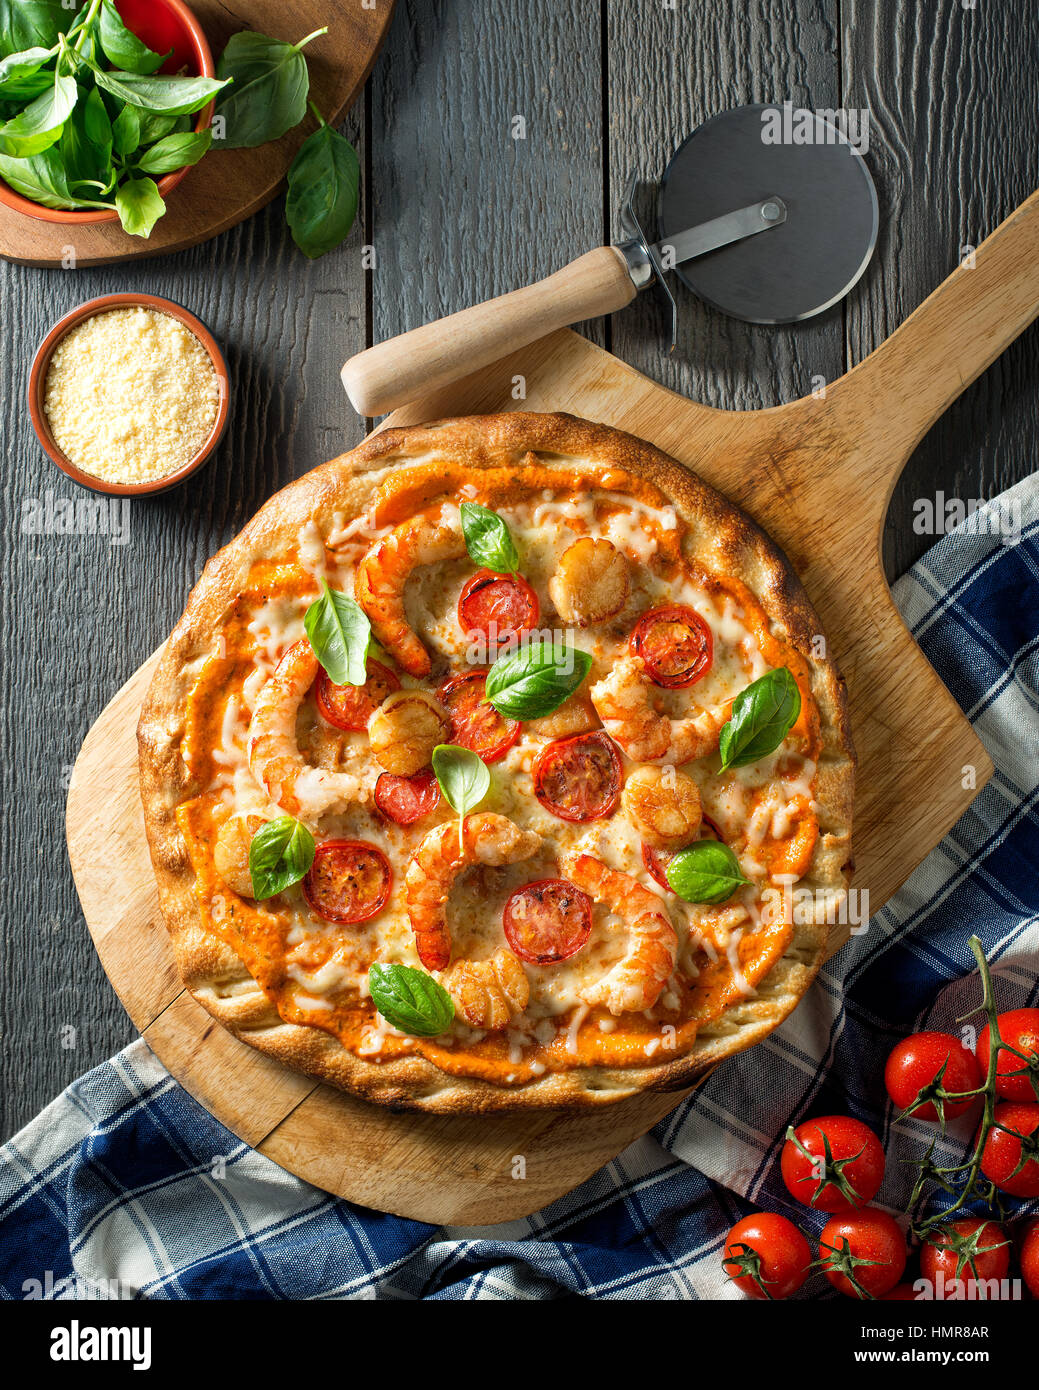 A delicious seafood pizza with shrimps, scallops, tomato, and basil with zesty red pepper sauce. Stock Photo